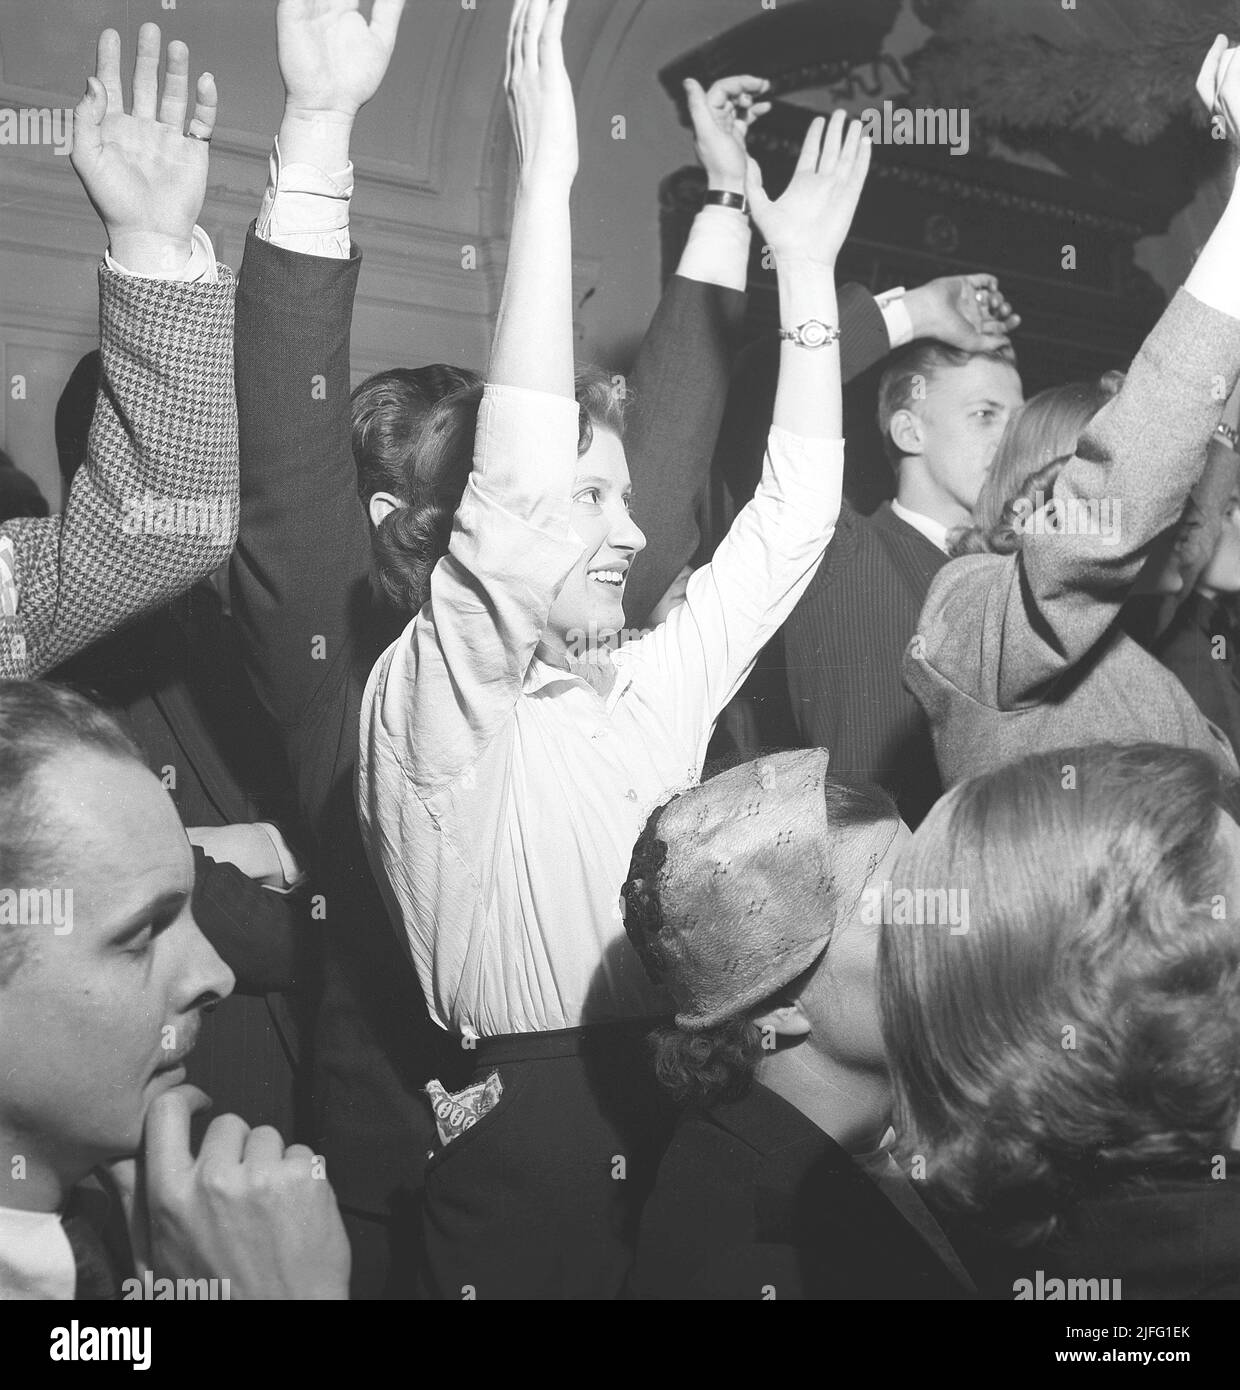 Fun in the 1950s. An audience of young women and men are visible exited, shouting, laughing at something on stage. They rise their hands and cheer. Sweden 1952 Kristoffersson ref BF7-4 Stock Photo